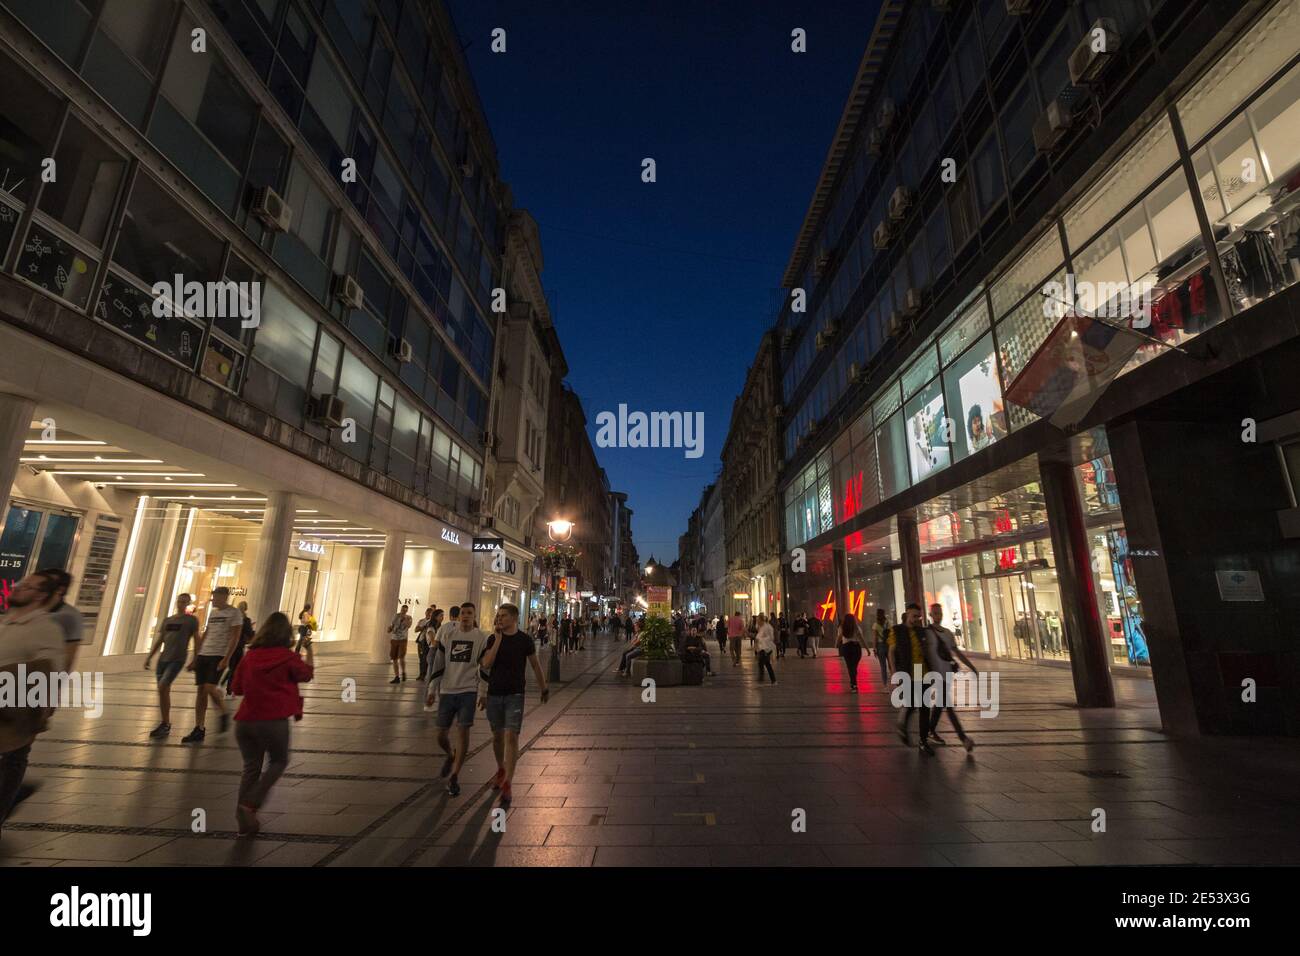 BELGRADE, SERBIA - MAY 9, 2020: Kneza Mihailova street at dawn, crowded. Also known as Knez Mihaila, this is the main pedestrian street of the city, a Stock Photo